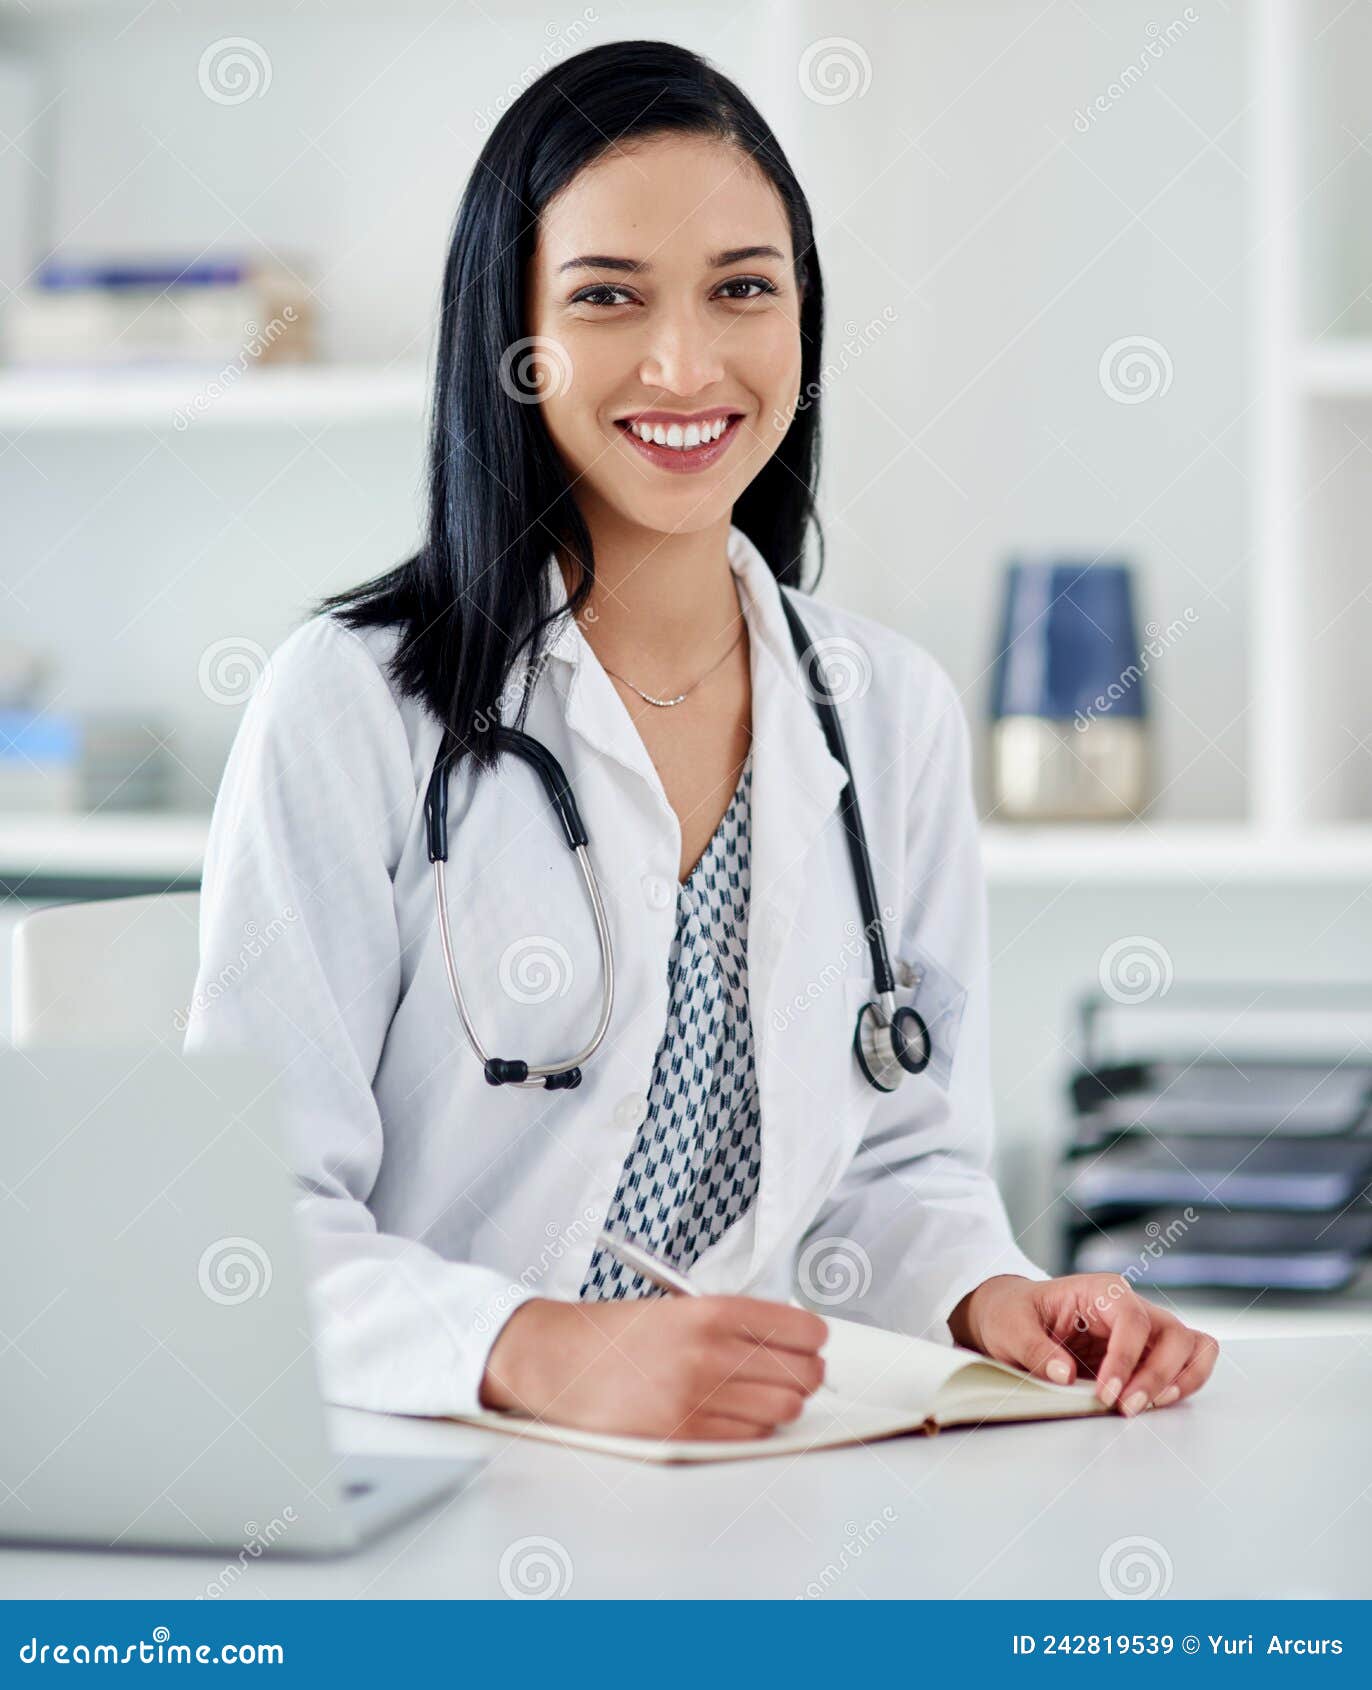 Im Giving You a Clean Bill of Health. Shot of a Young Doctor Writing in ...